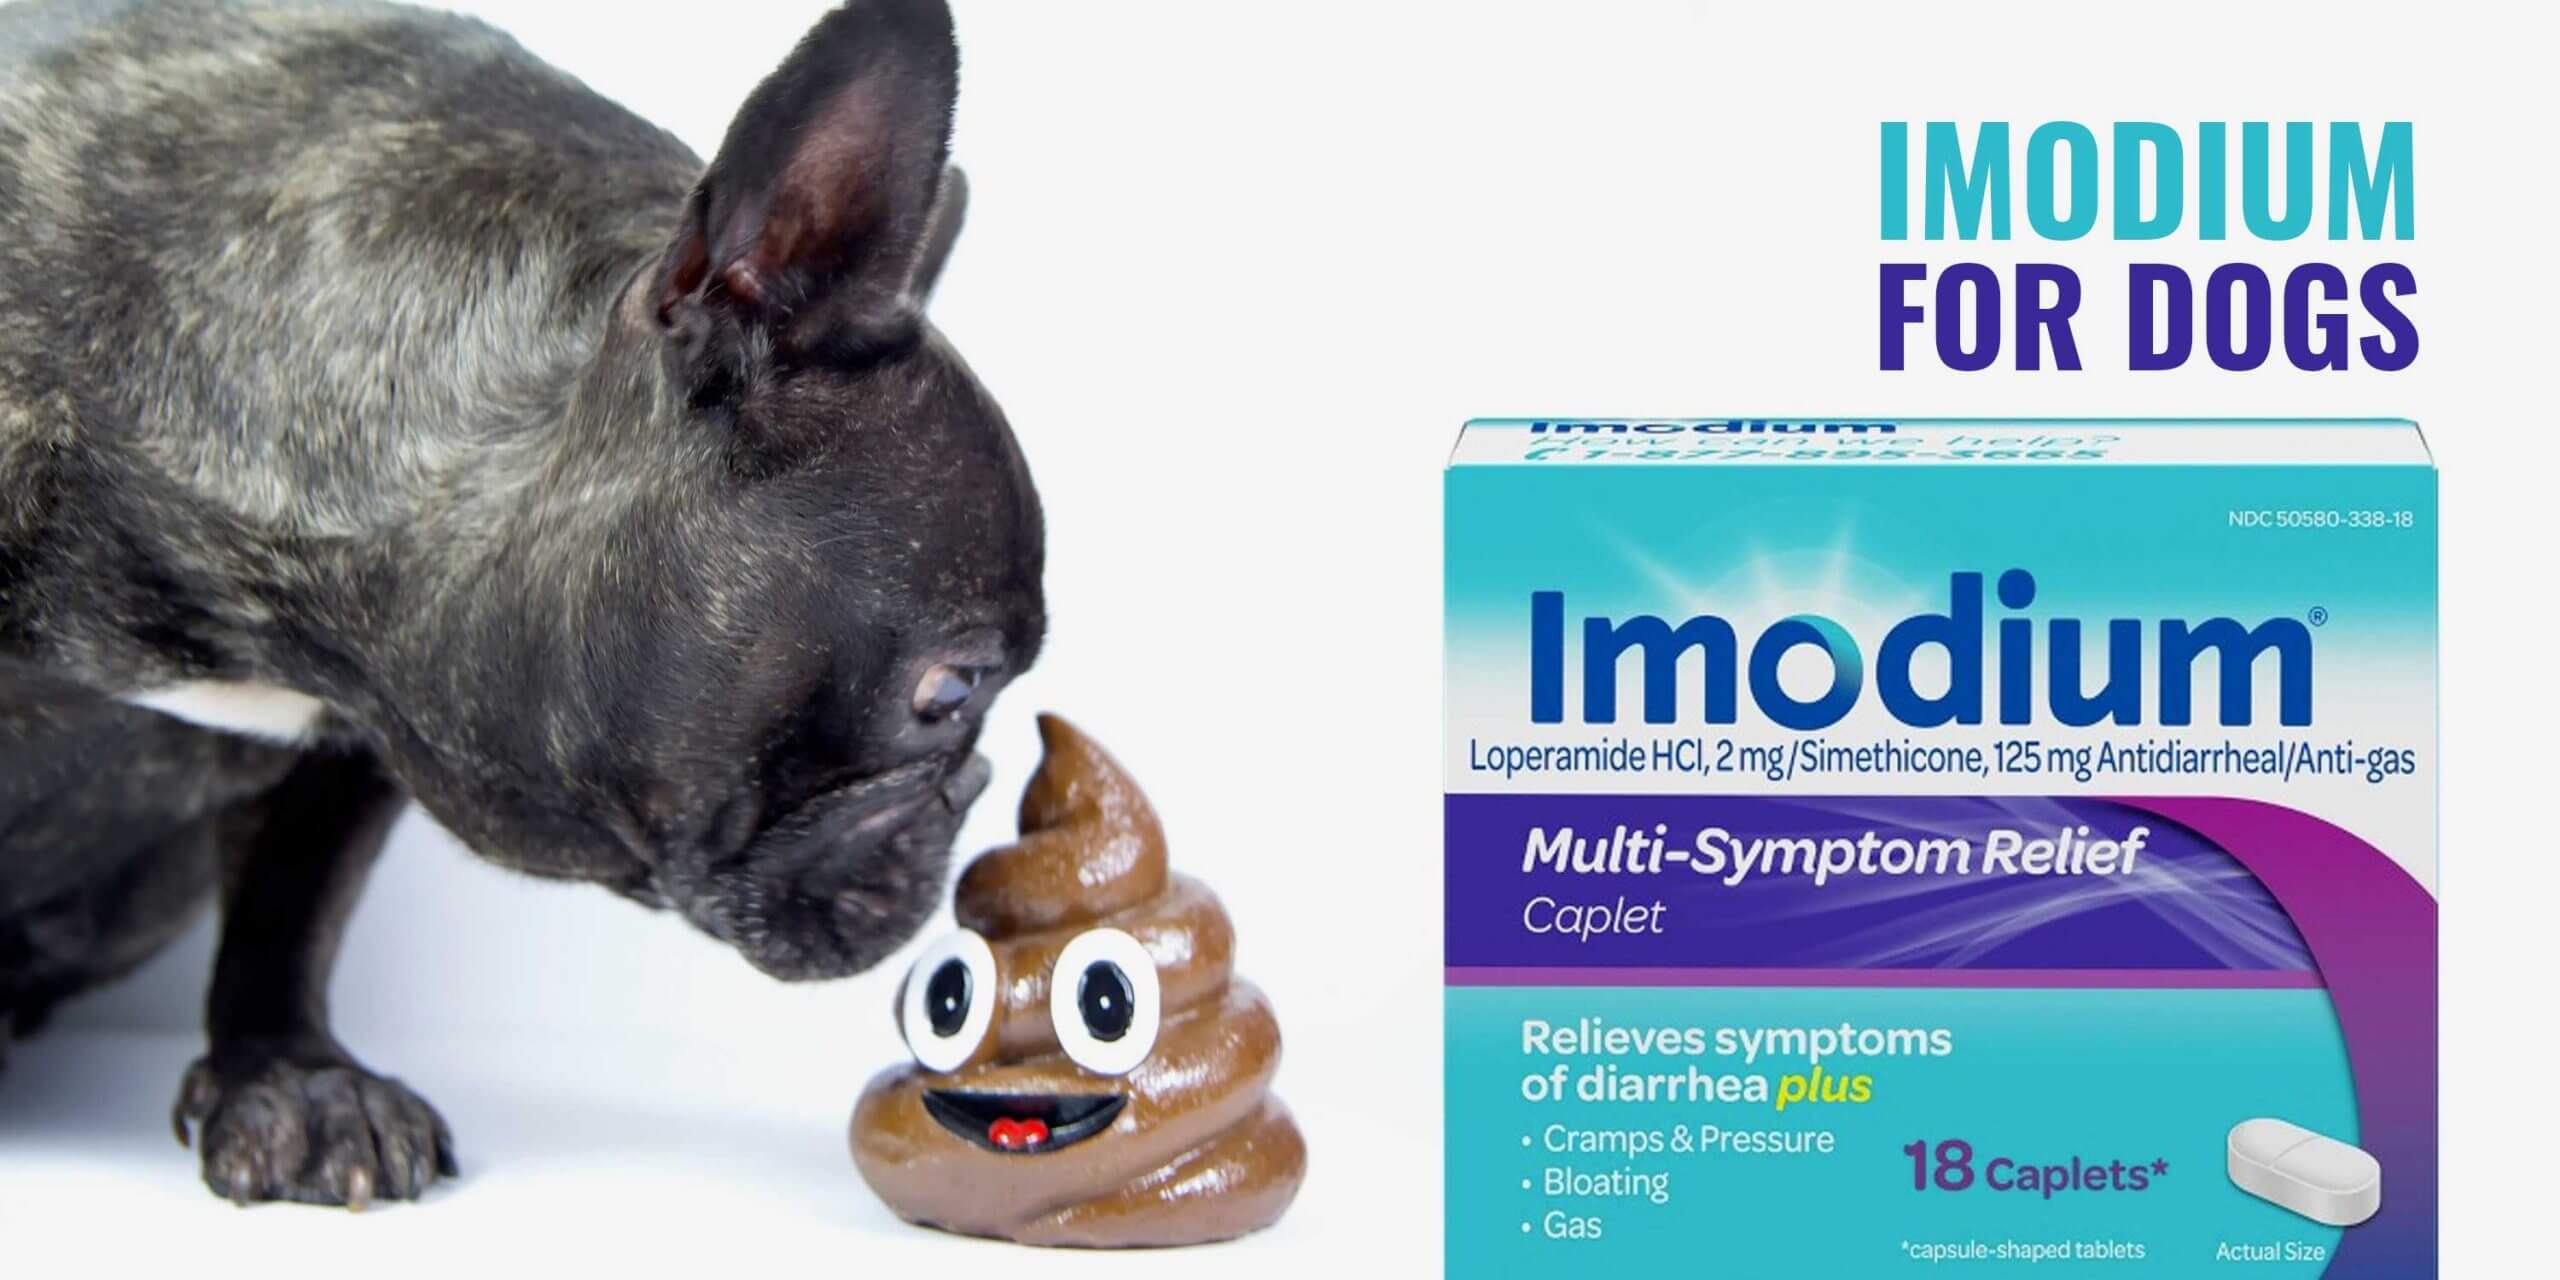 is imodium safe for dogs with diarrhea